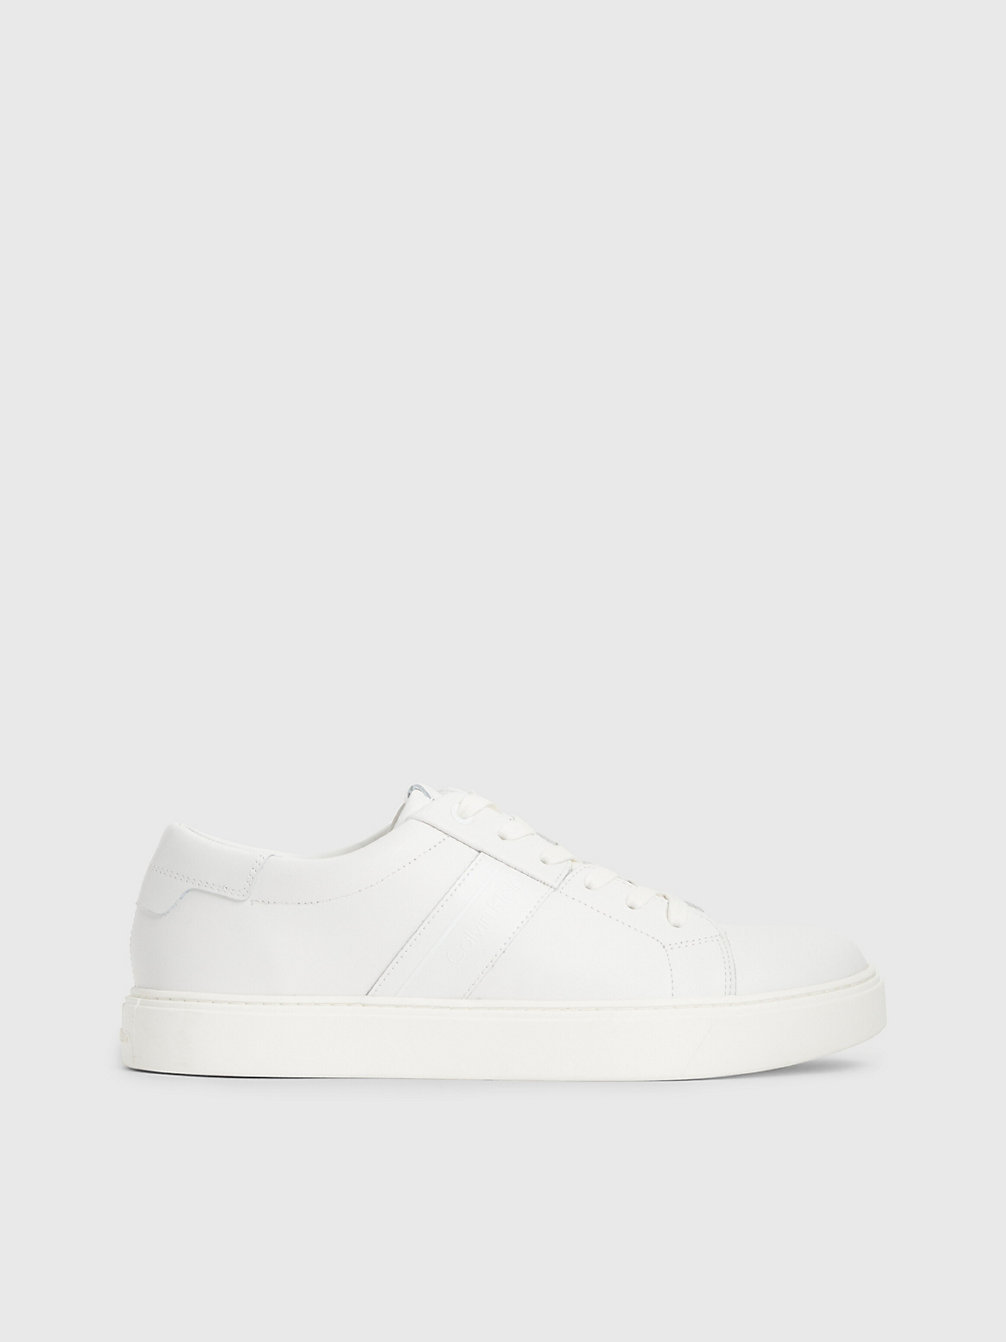 TRIPLE WHITE Leather Trainers undefined men Calvin Klein